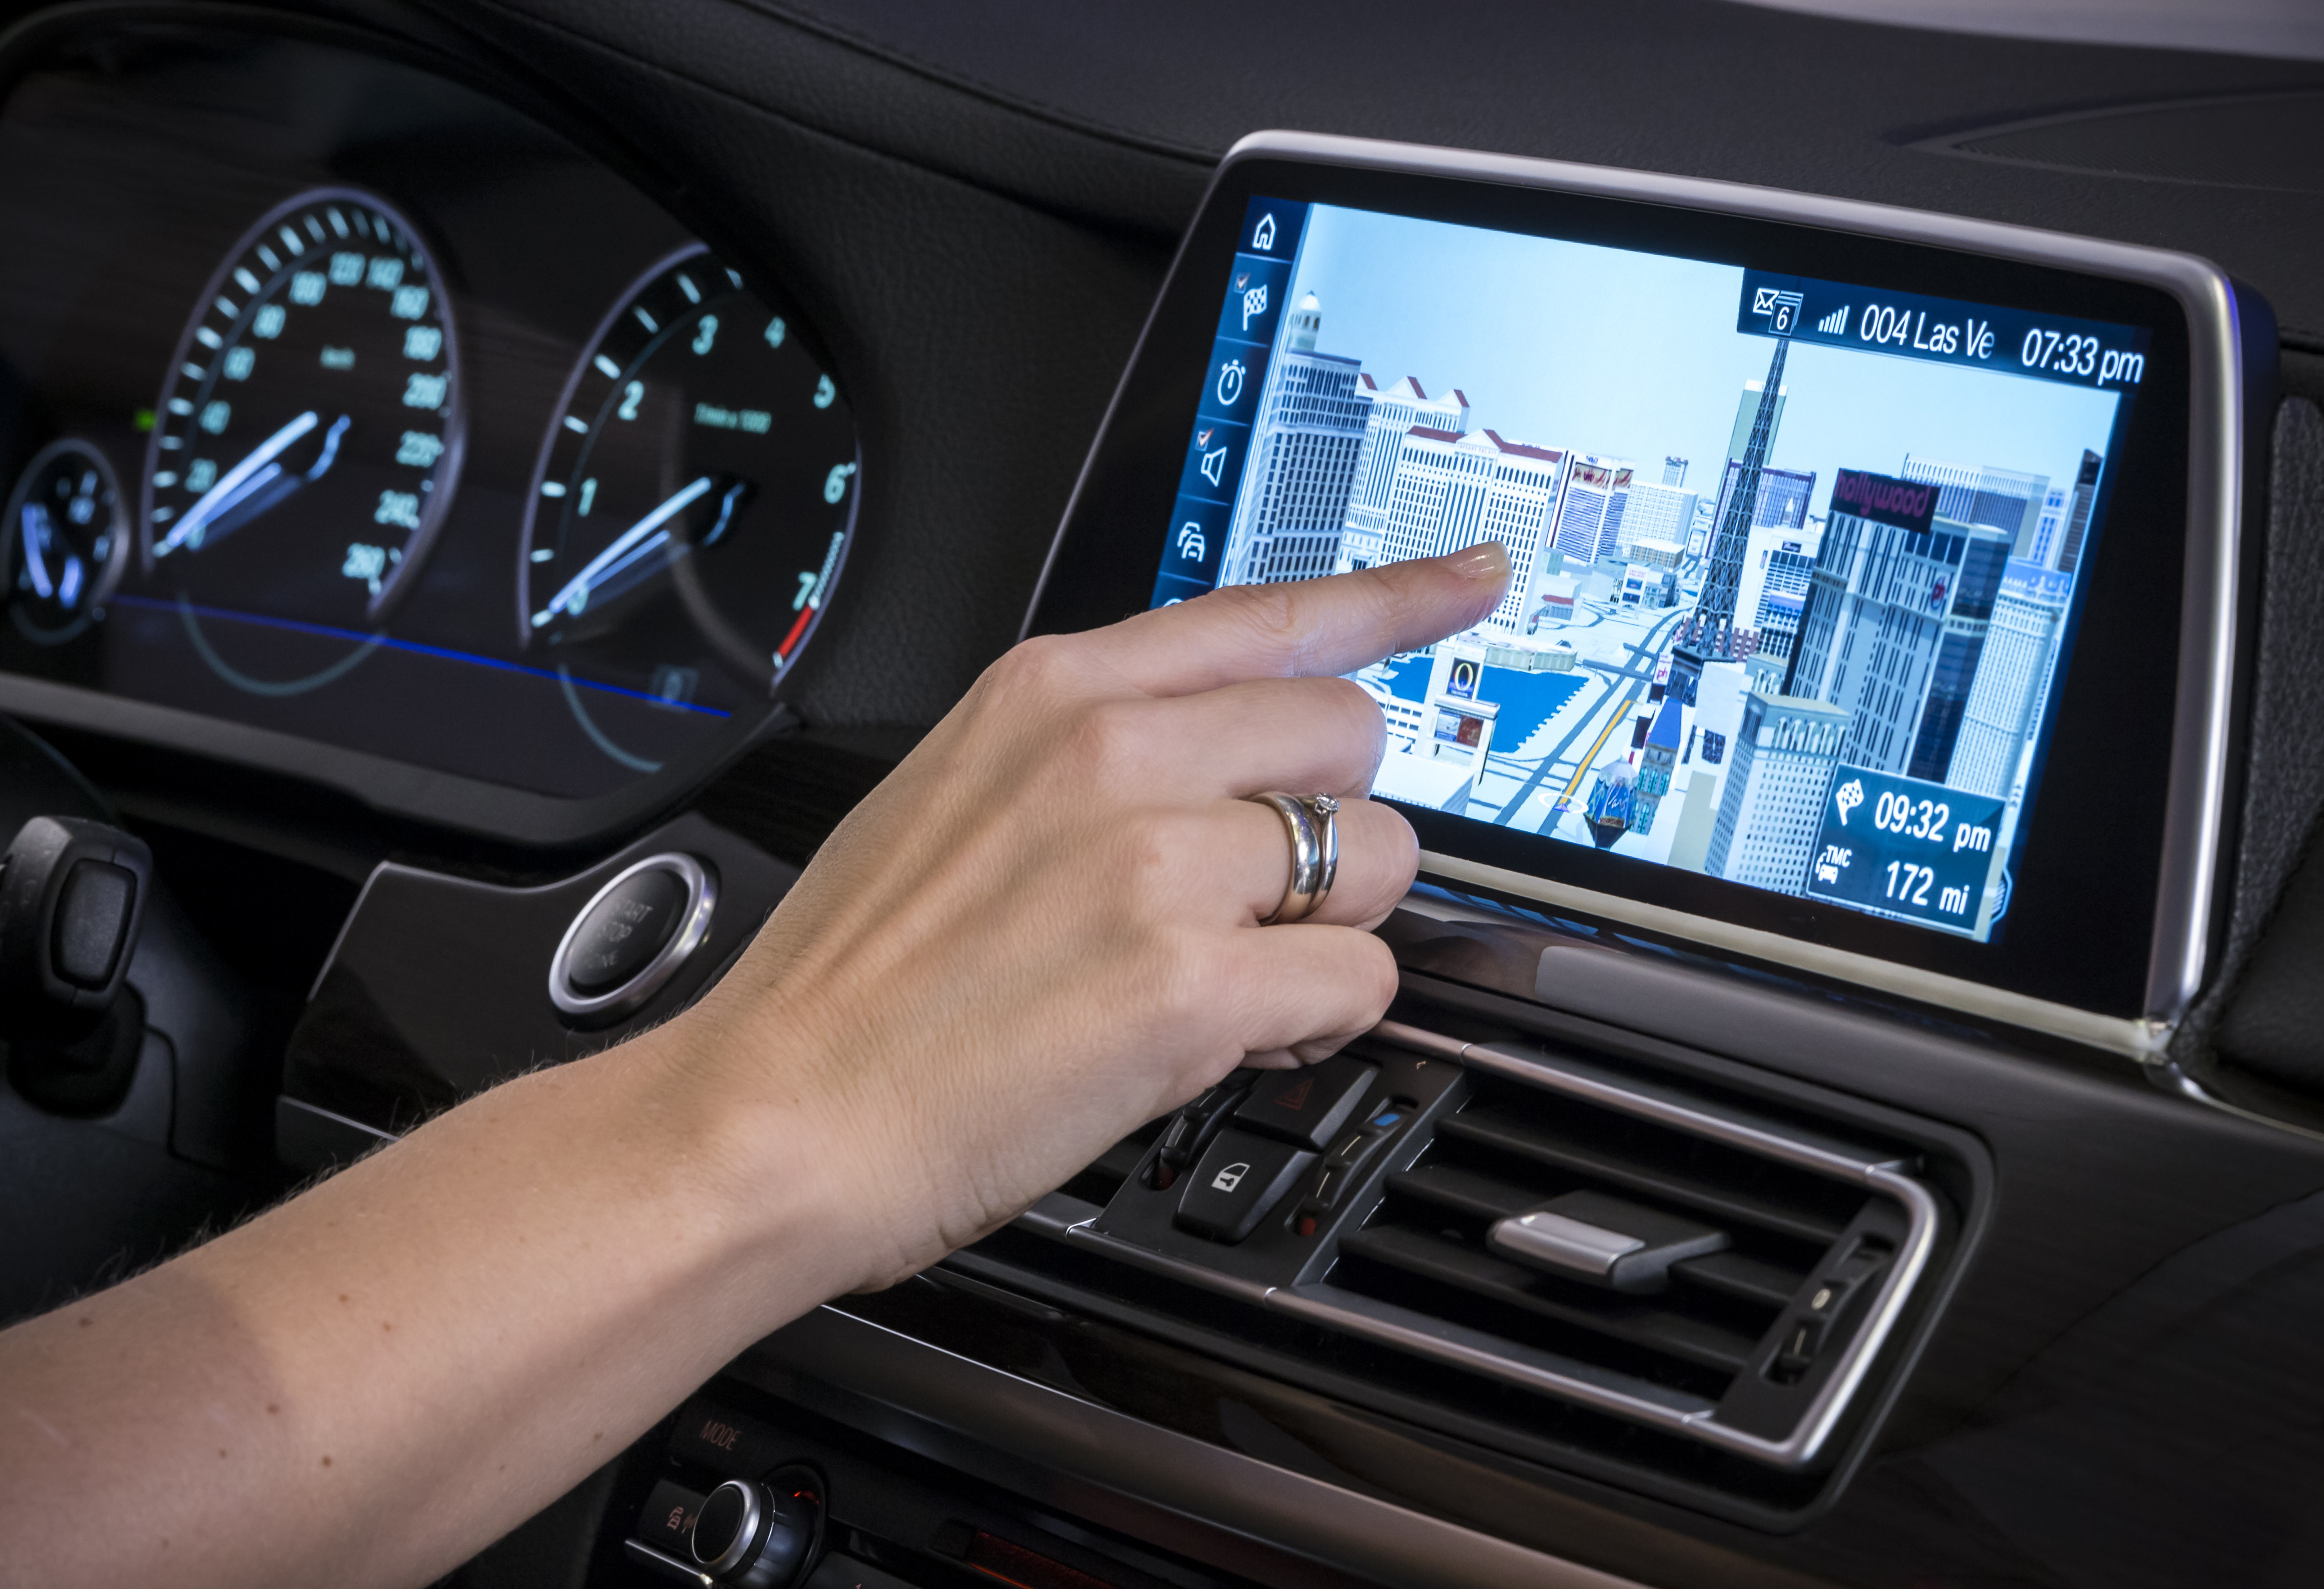 The best in-car infotainment systems - which manufacturer do